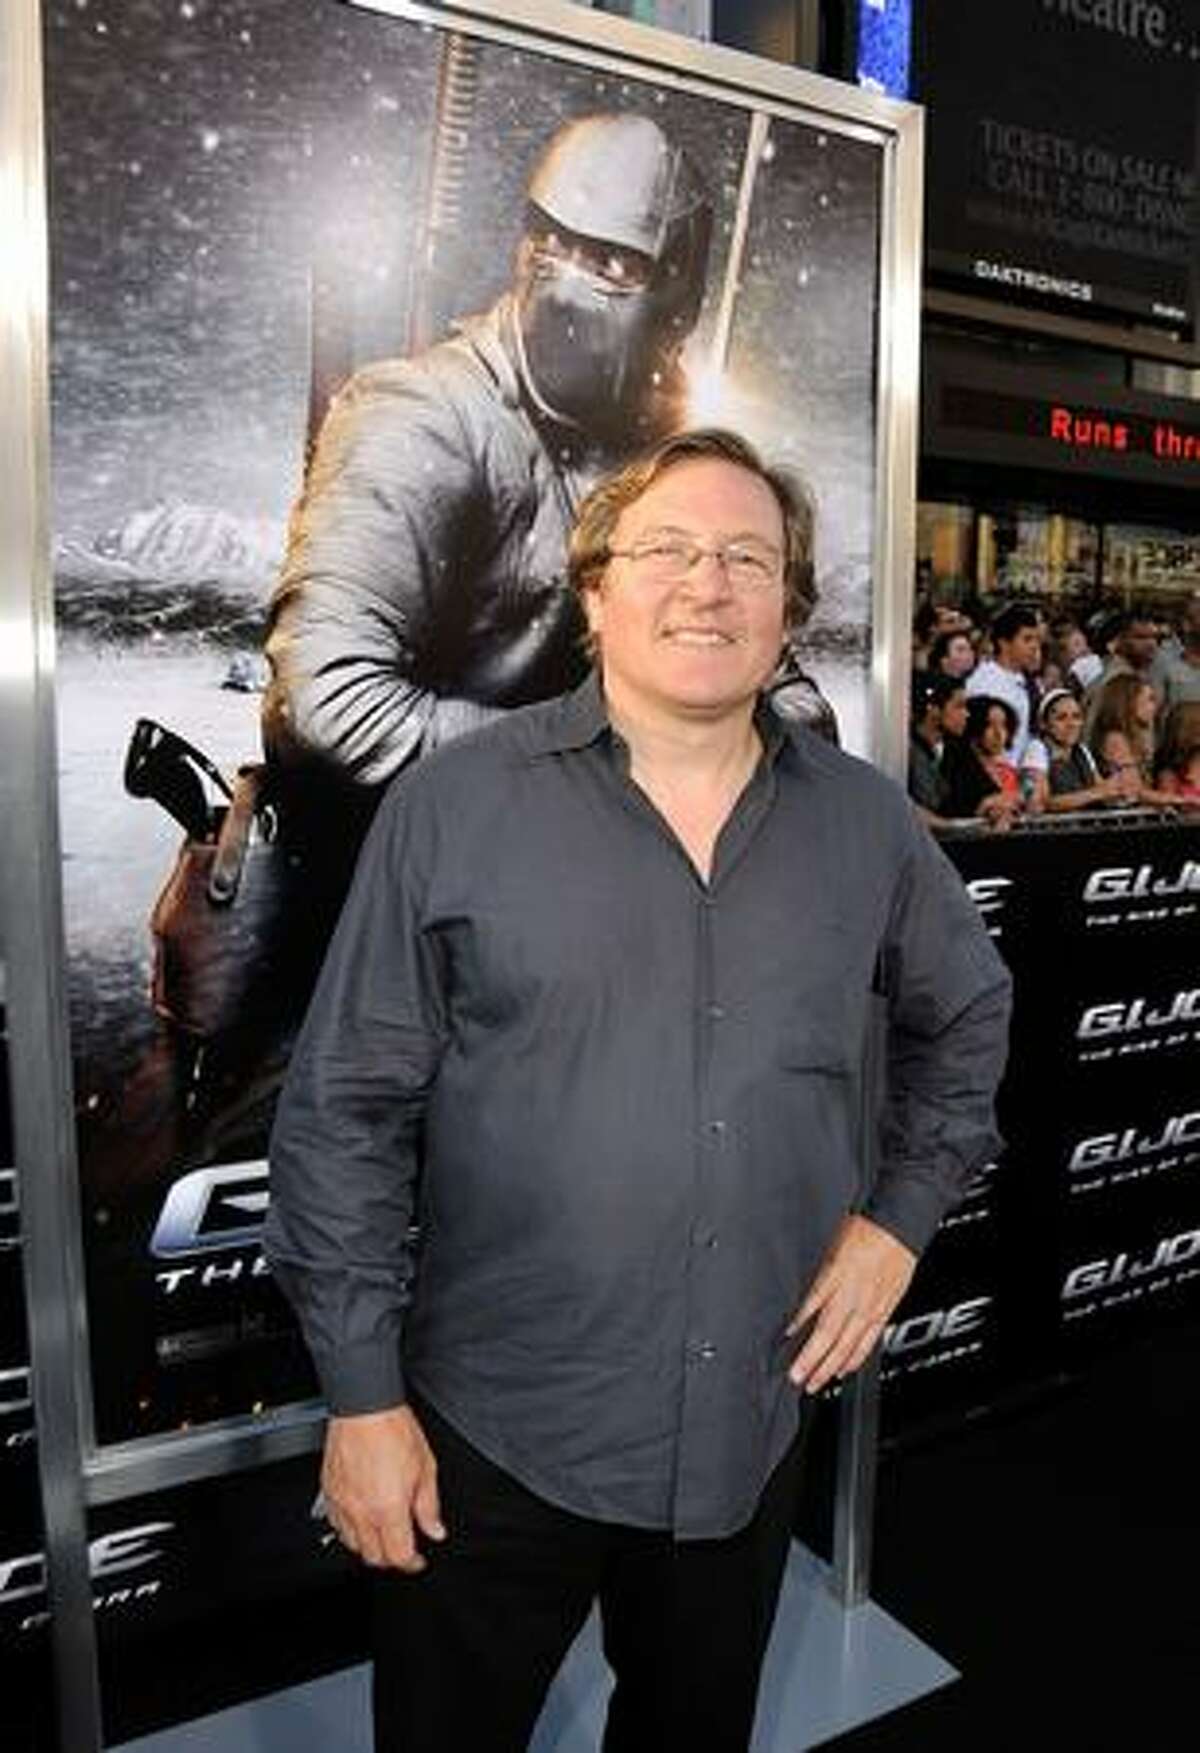 Producer Lorenzo di Bonaventura arrives at the special screening of "G.I. Joe: The Rise Of Cobra" held at Grauman's Chinese Theatre in Los Angeles, California.